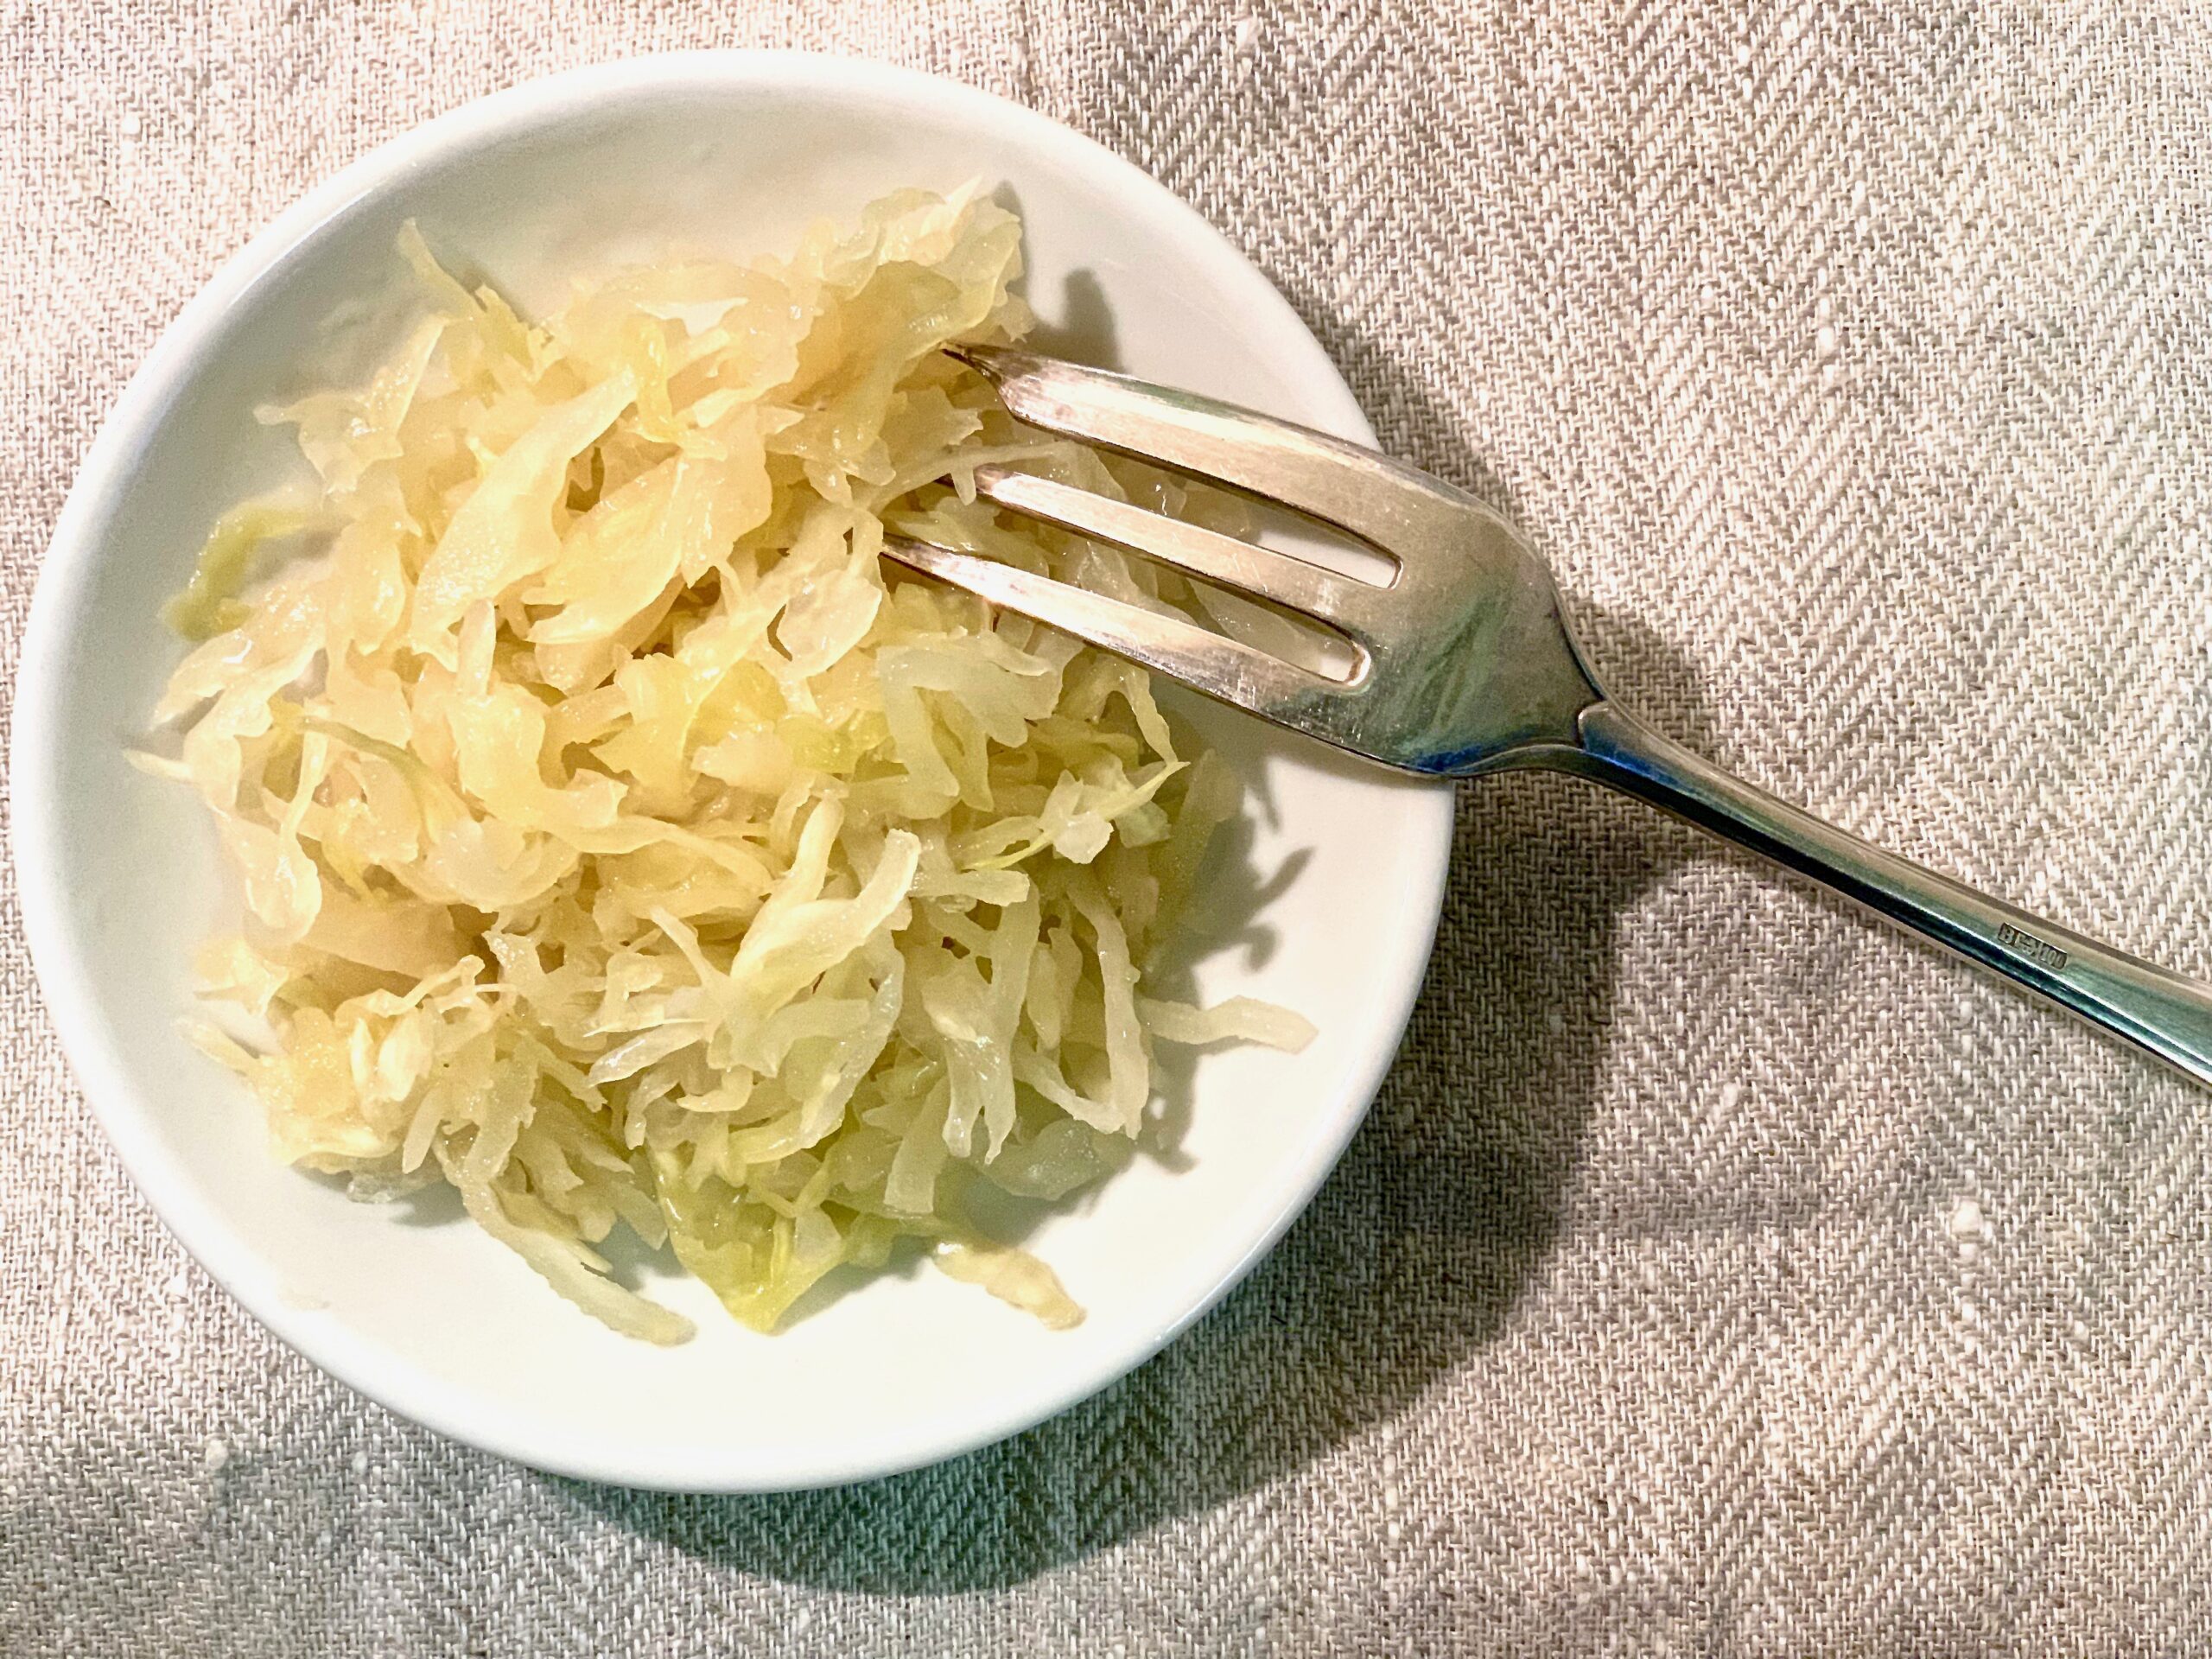 How to Add Fermented Foods to Every Meal